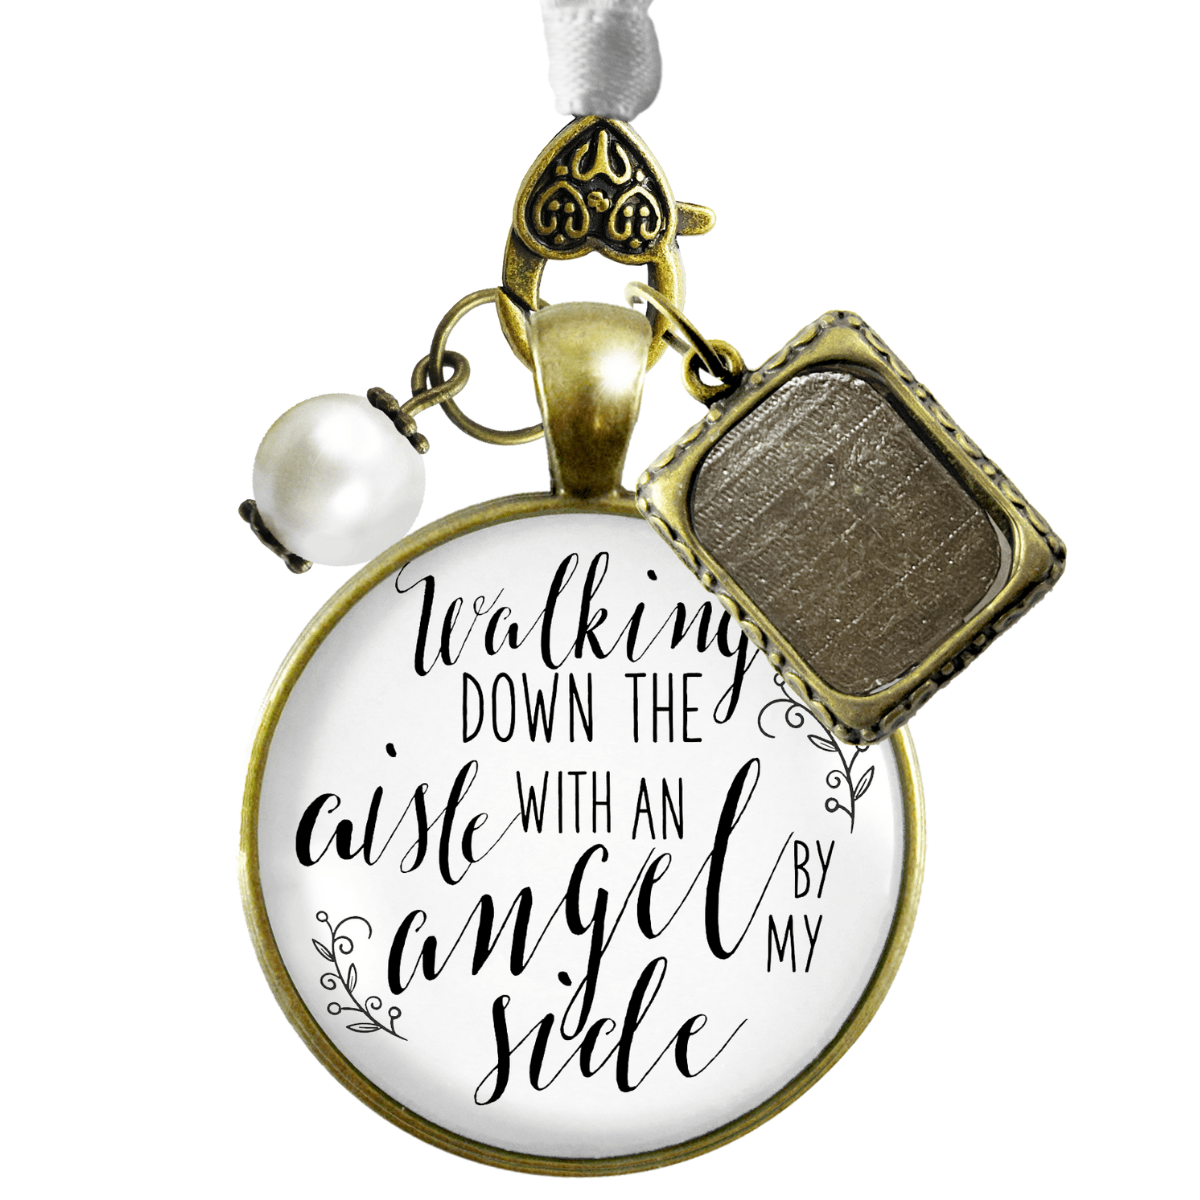 Walking Down The Aisle With An Angel By My Side - BRONZE - WHITE - WHITE BEAD - 1 FRAME